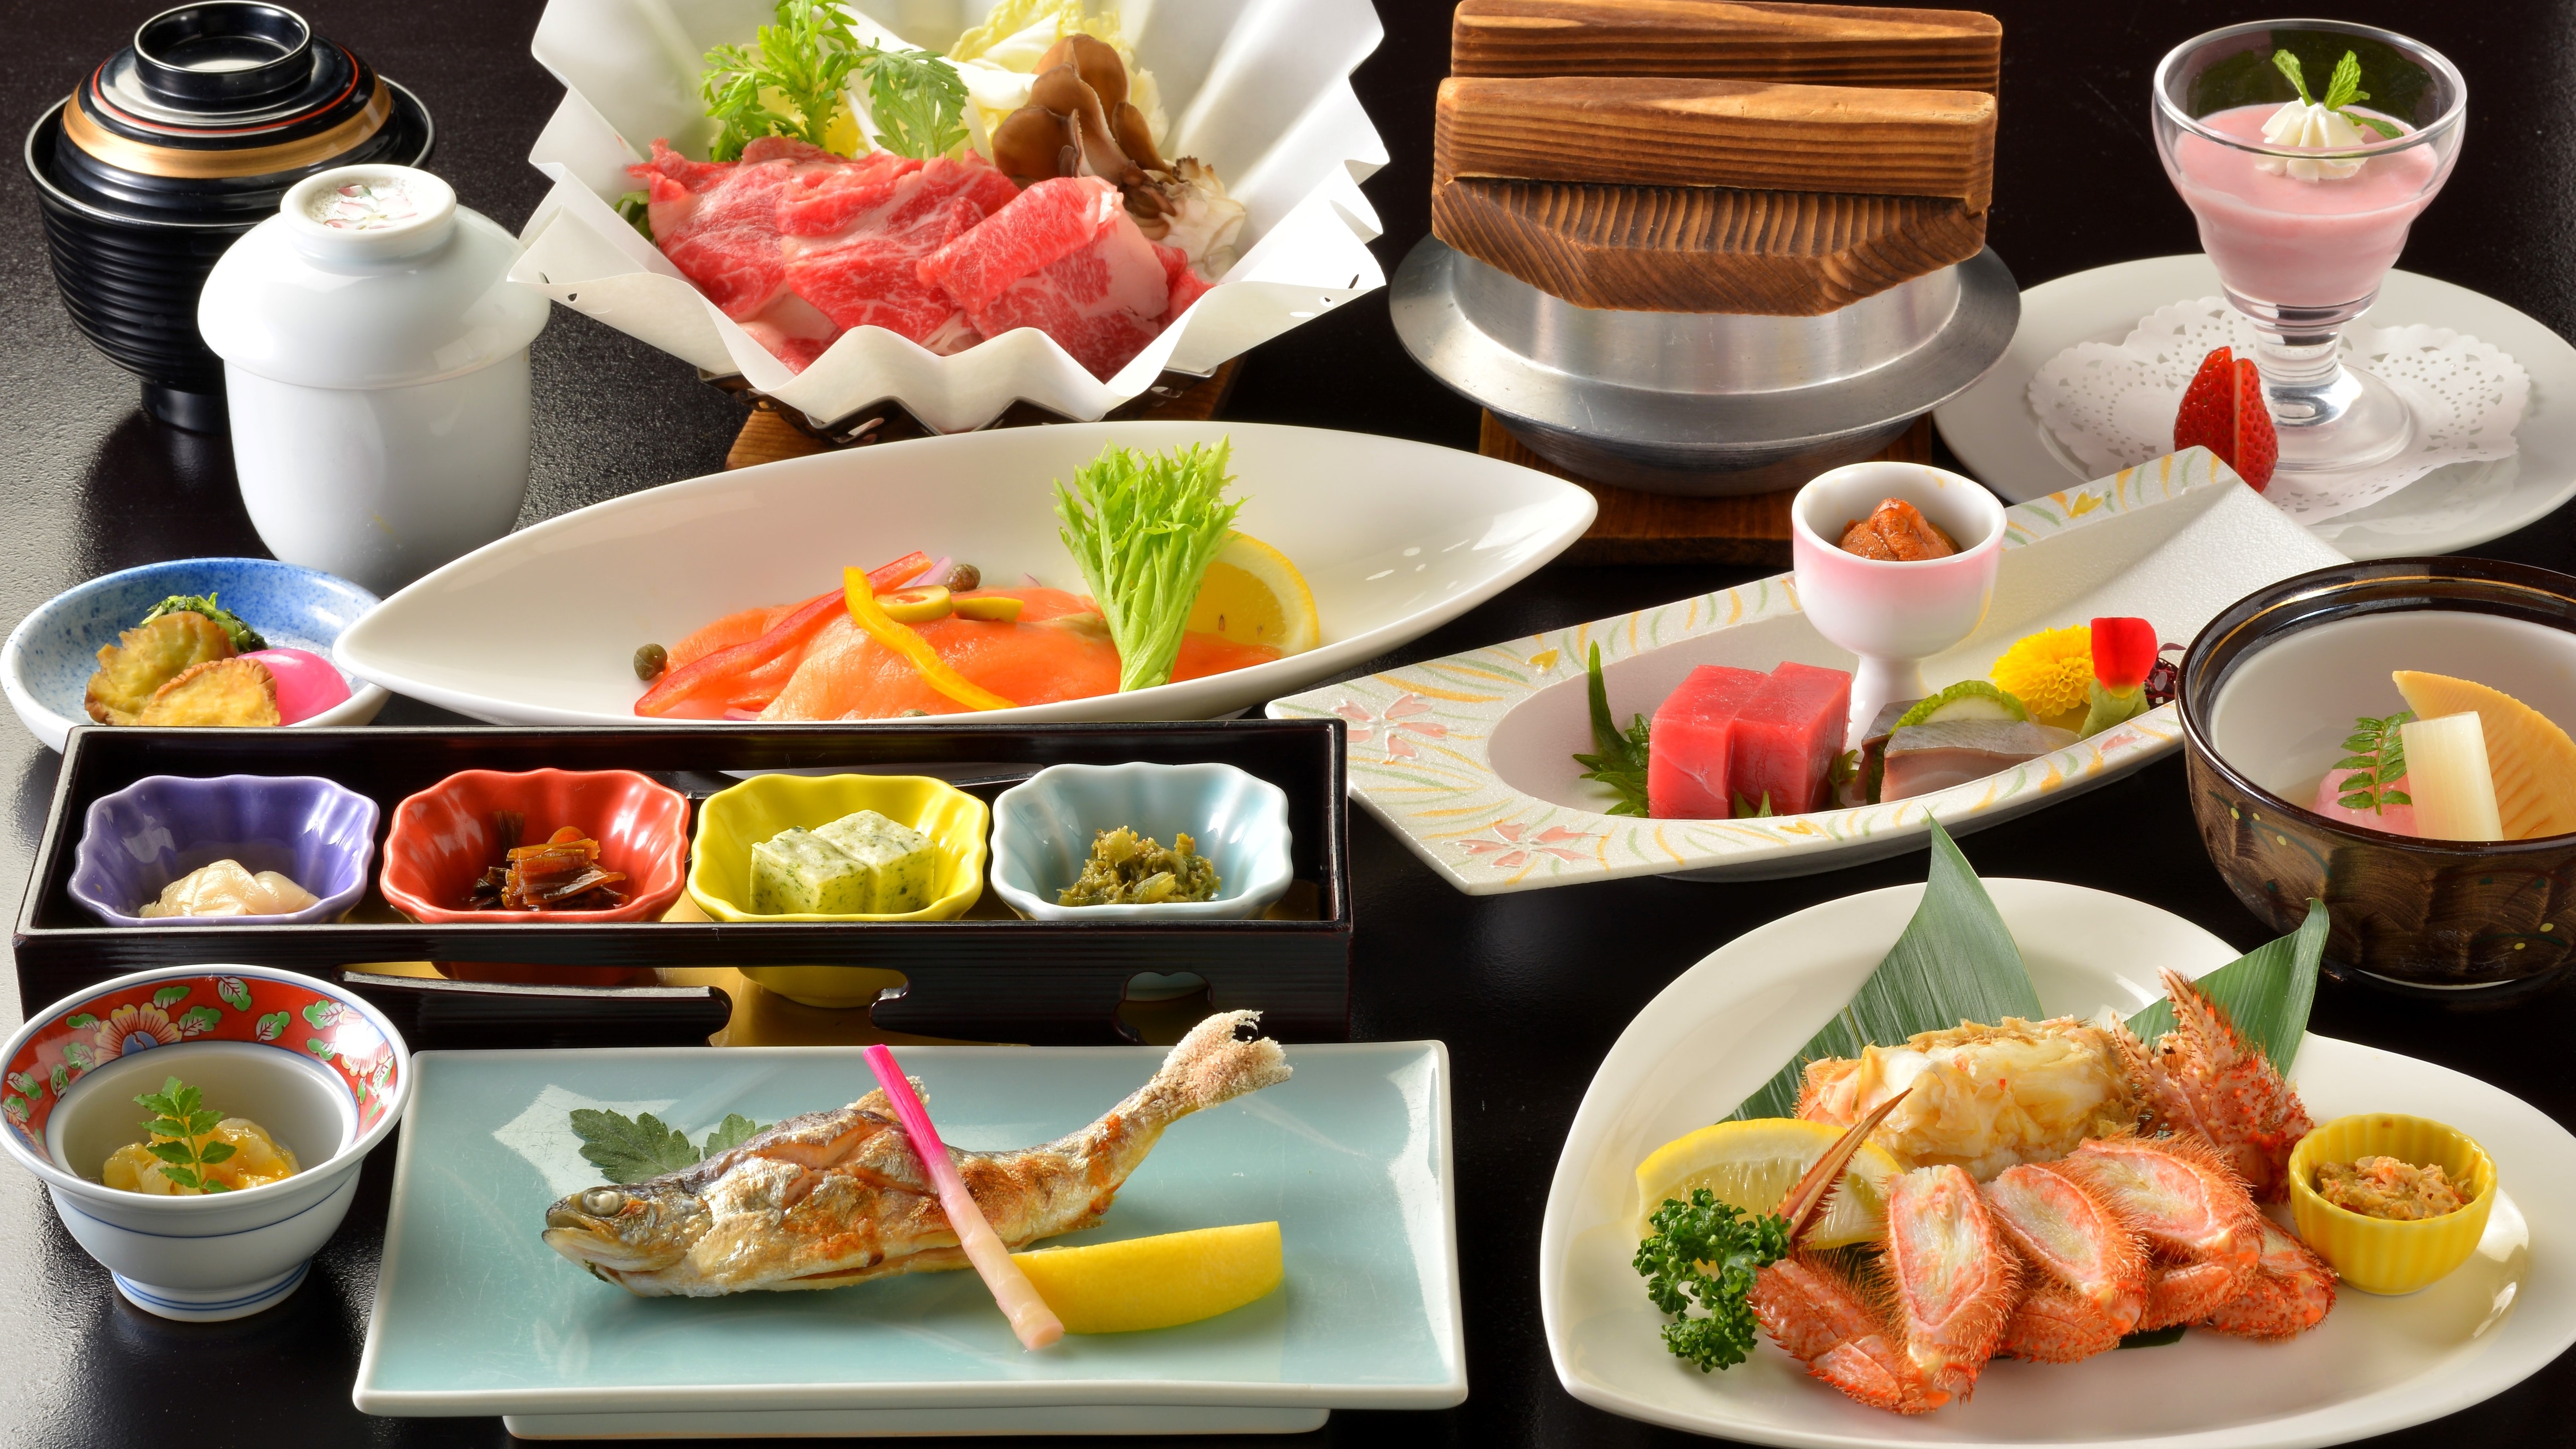 ■ Special kaiseki meals with carefully selected ingredients such as horsehair crab and beef